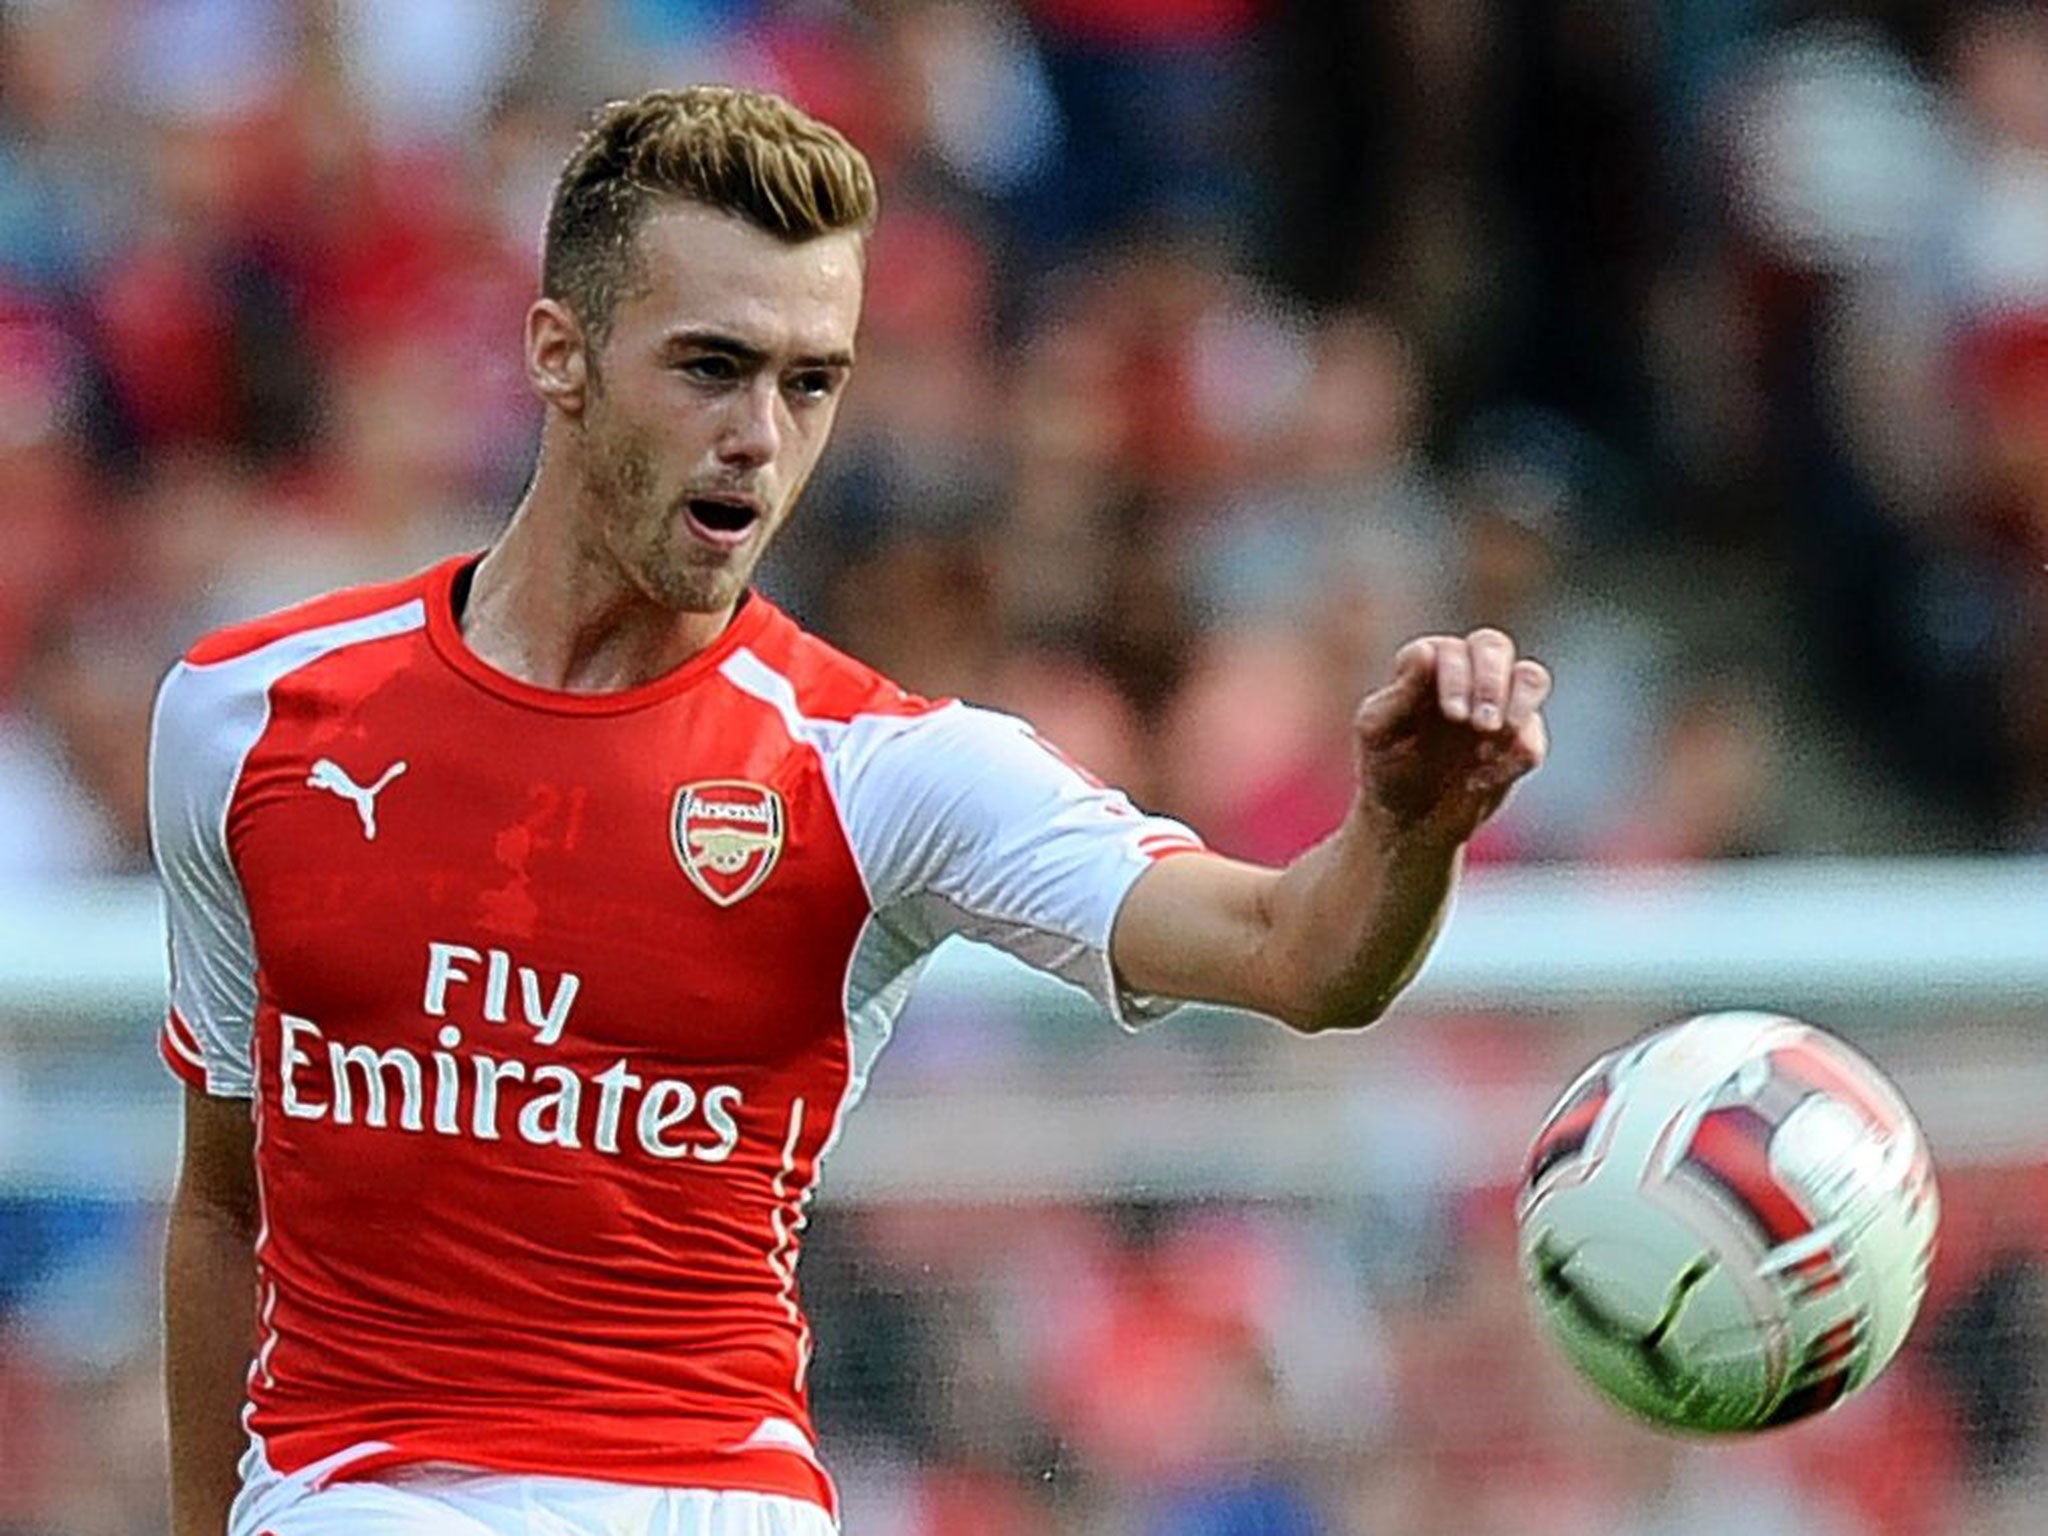 Calum Chambers is a good signing by Arsenal. He reminds me of a young Gary Cahill: he’s naturally very powerful and has athleticism that allows him to deal with difficult situations